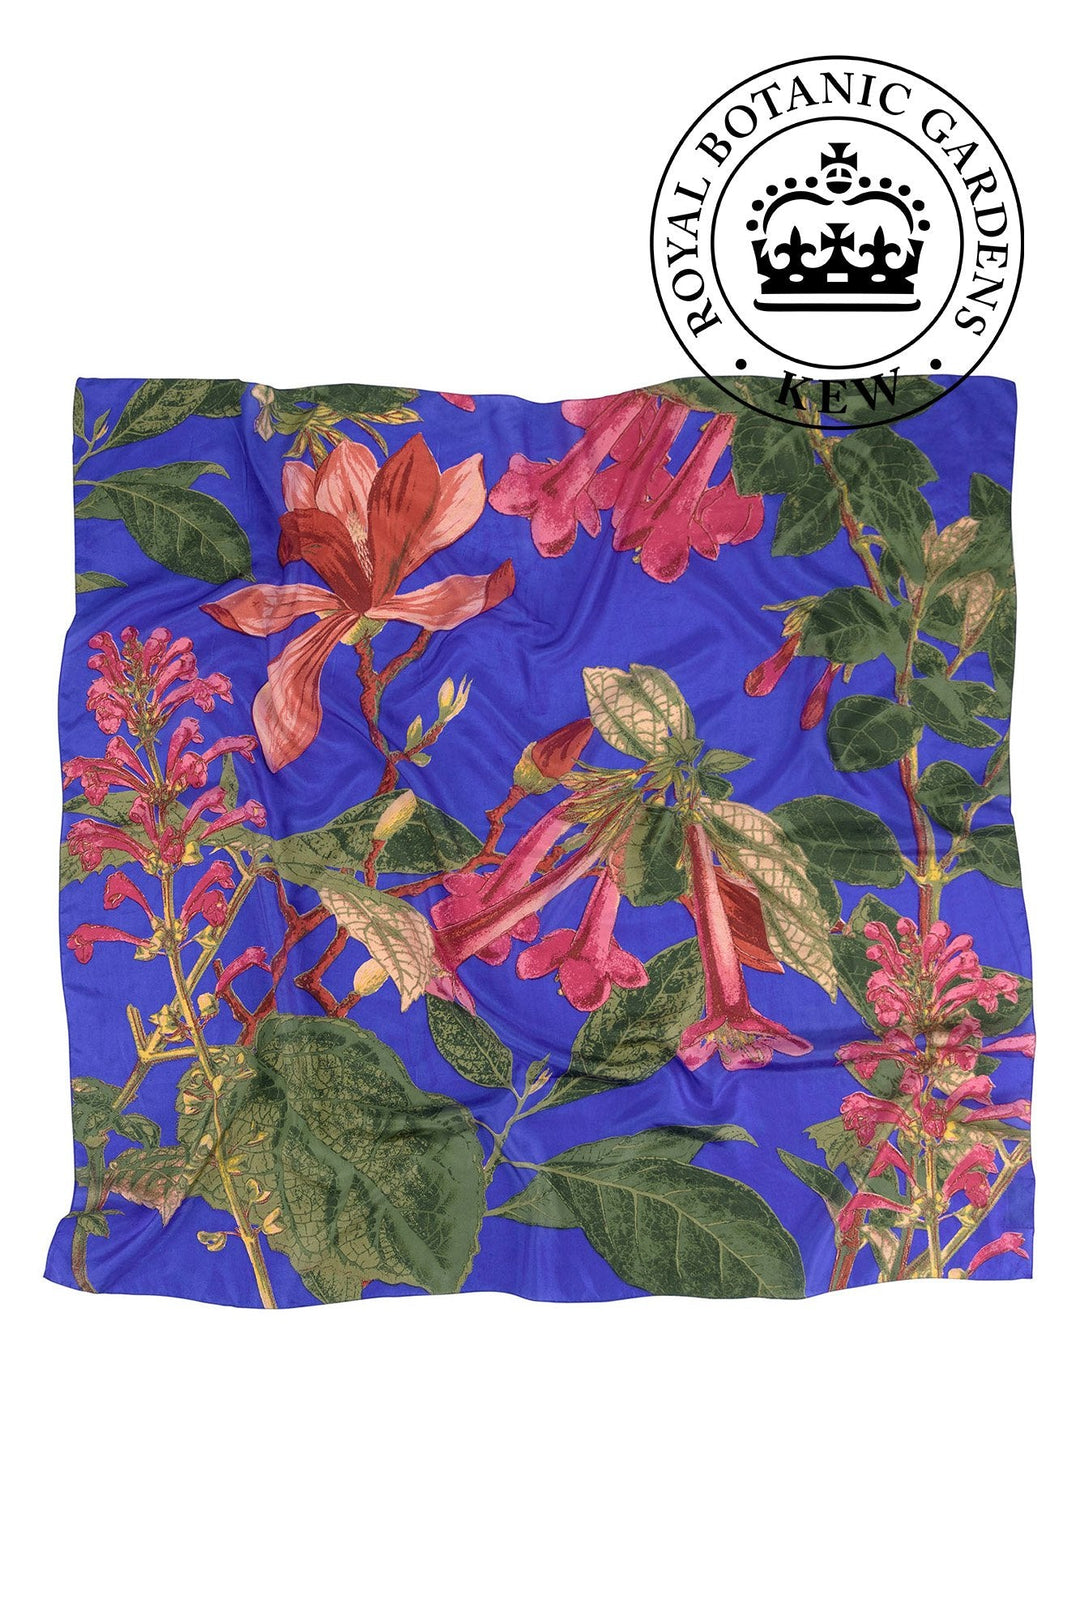 KEW Magnolia Purple Silk Square Scarf- 100% silk, 100% hand screen printed and a whole 100cm x 100cm of print, this silk scarf oozes luxury whether you wear it knotted around your neck, as a headscarf or fastened around the handle of your favourite handbag.